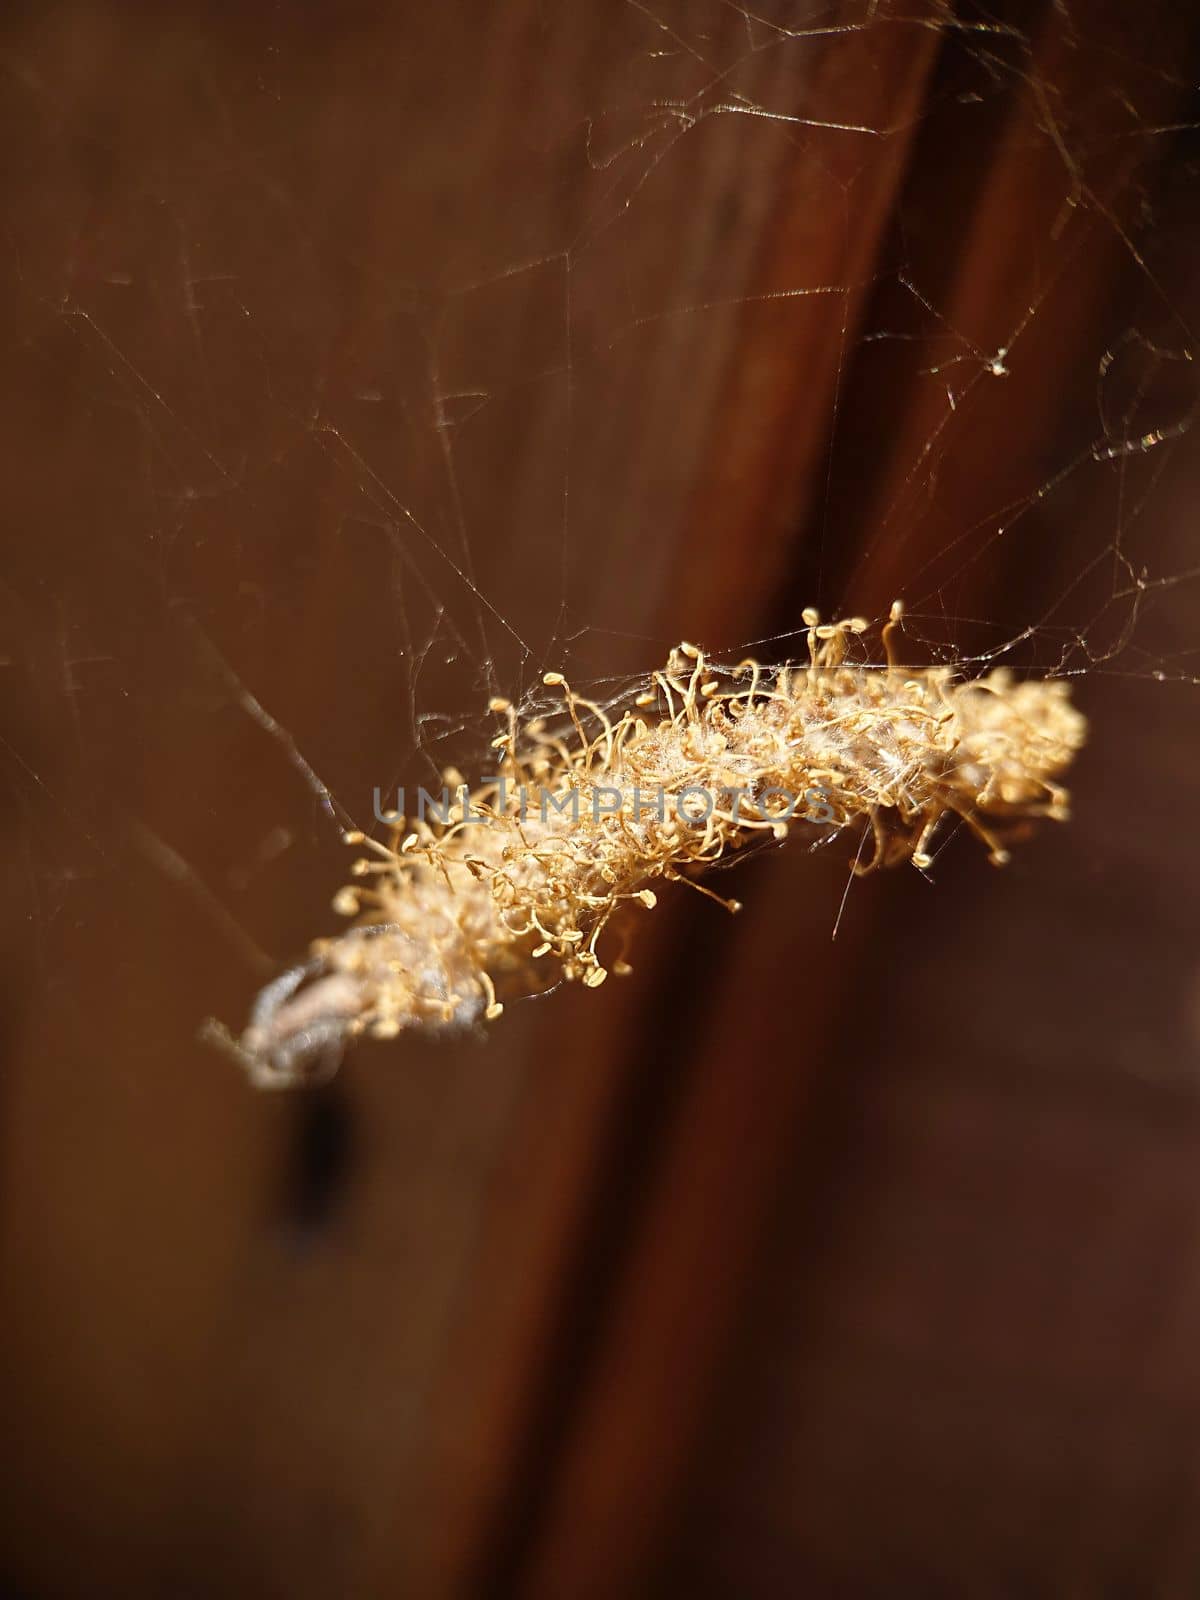 Macrophotography. A dry golden bundle with a larva weighs on the web. Texture or background